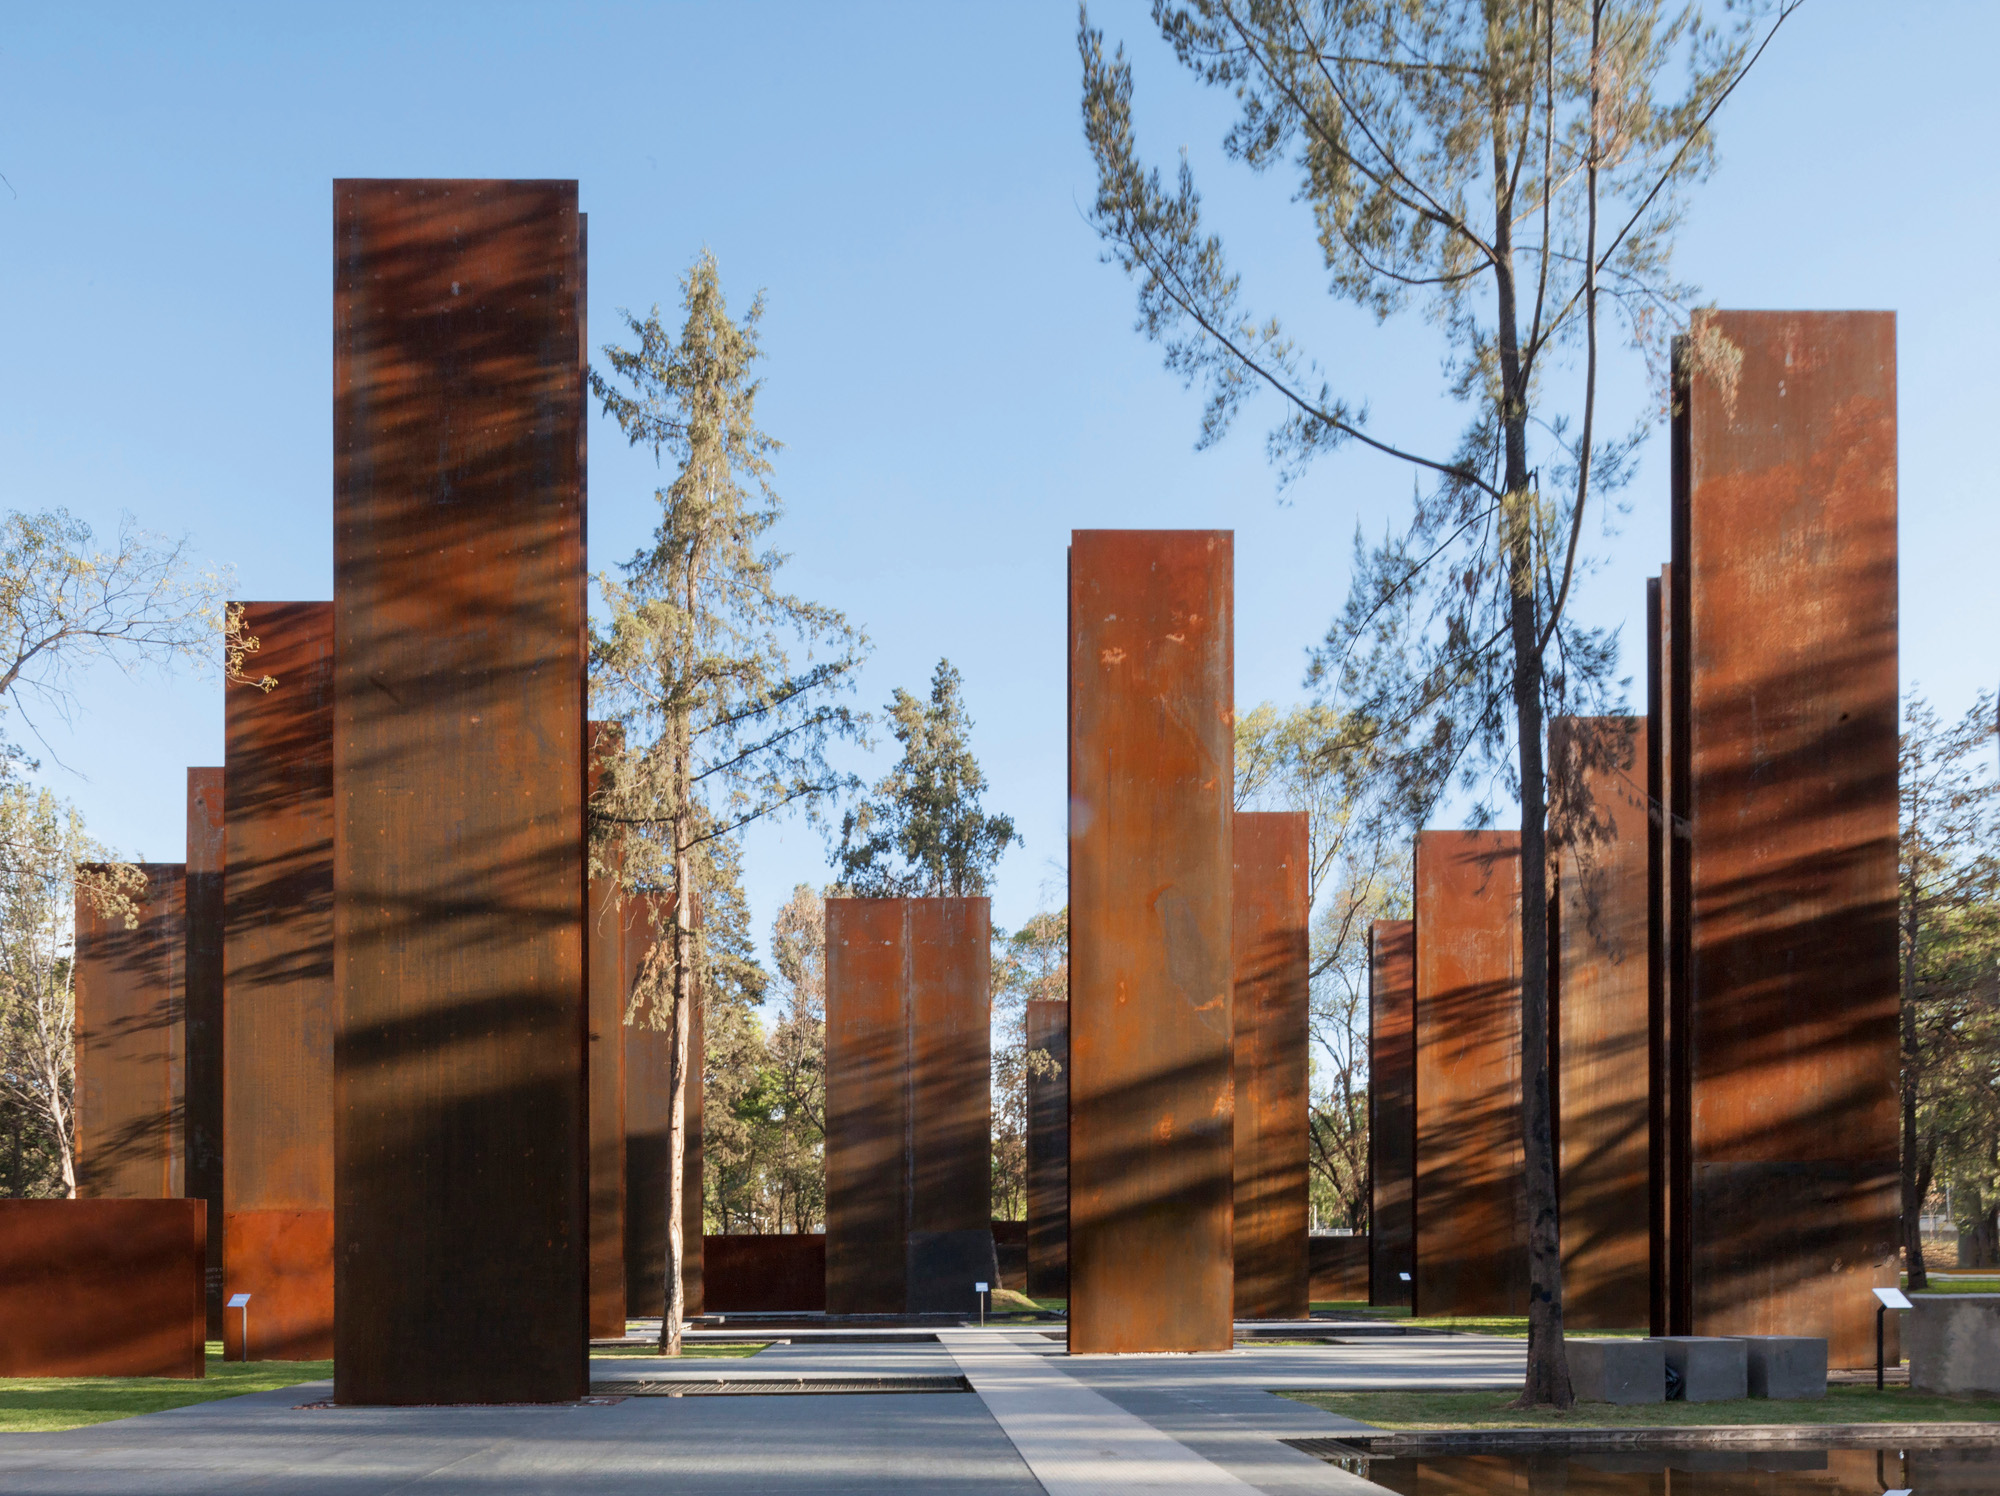 Memorial to the Victims of Violence in Mexico, Mexico City, Mexico, Gaeta-Springall Arquitectos (2012). Image courtesy of the architects. As featured in In Memory Of